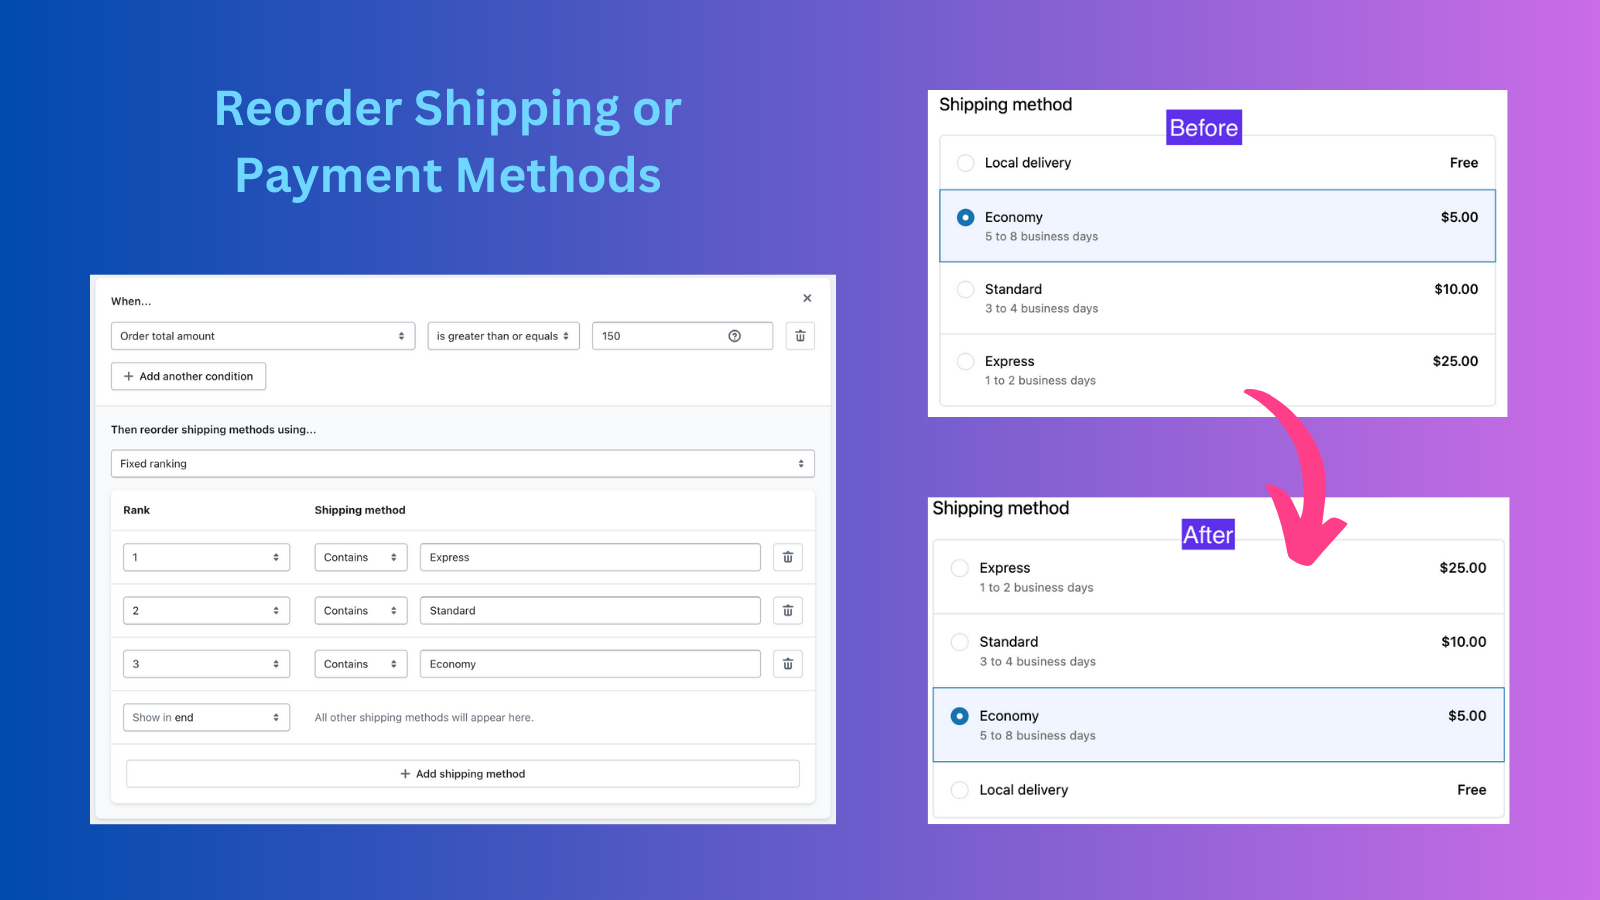 Details for reorder shipping or payment methods functionality